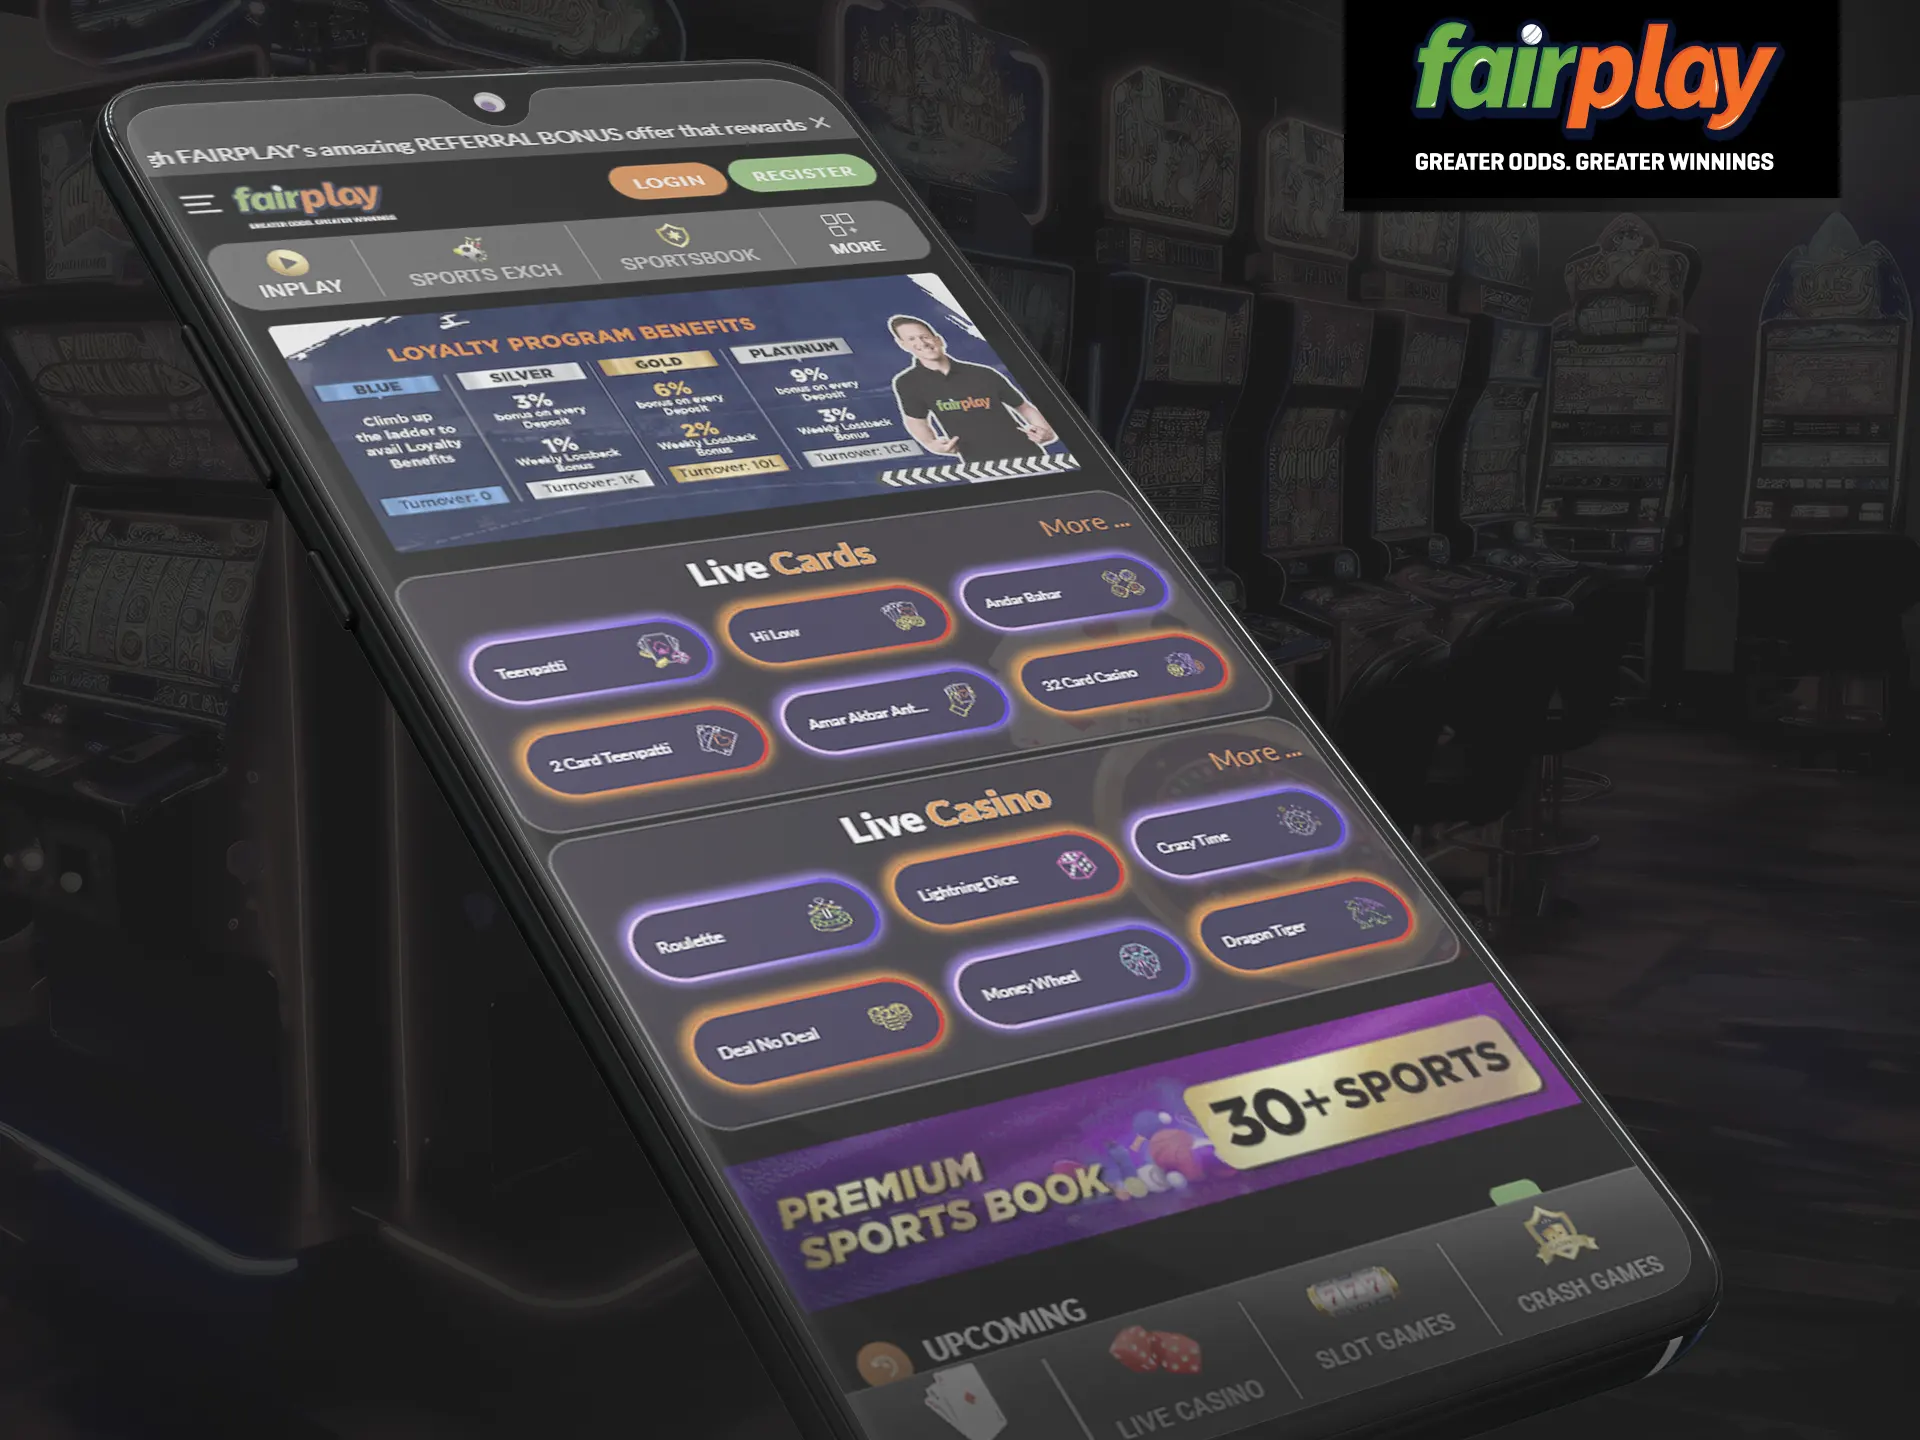 FairPlay Mobile Site offers full functionality, allowing bets, slot play, and bonuses via browser.